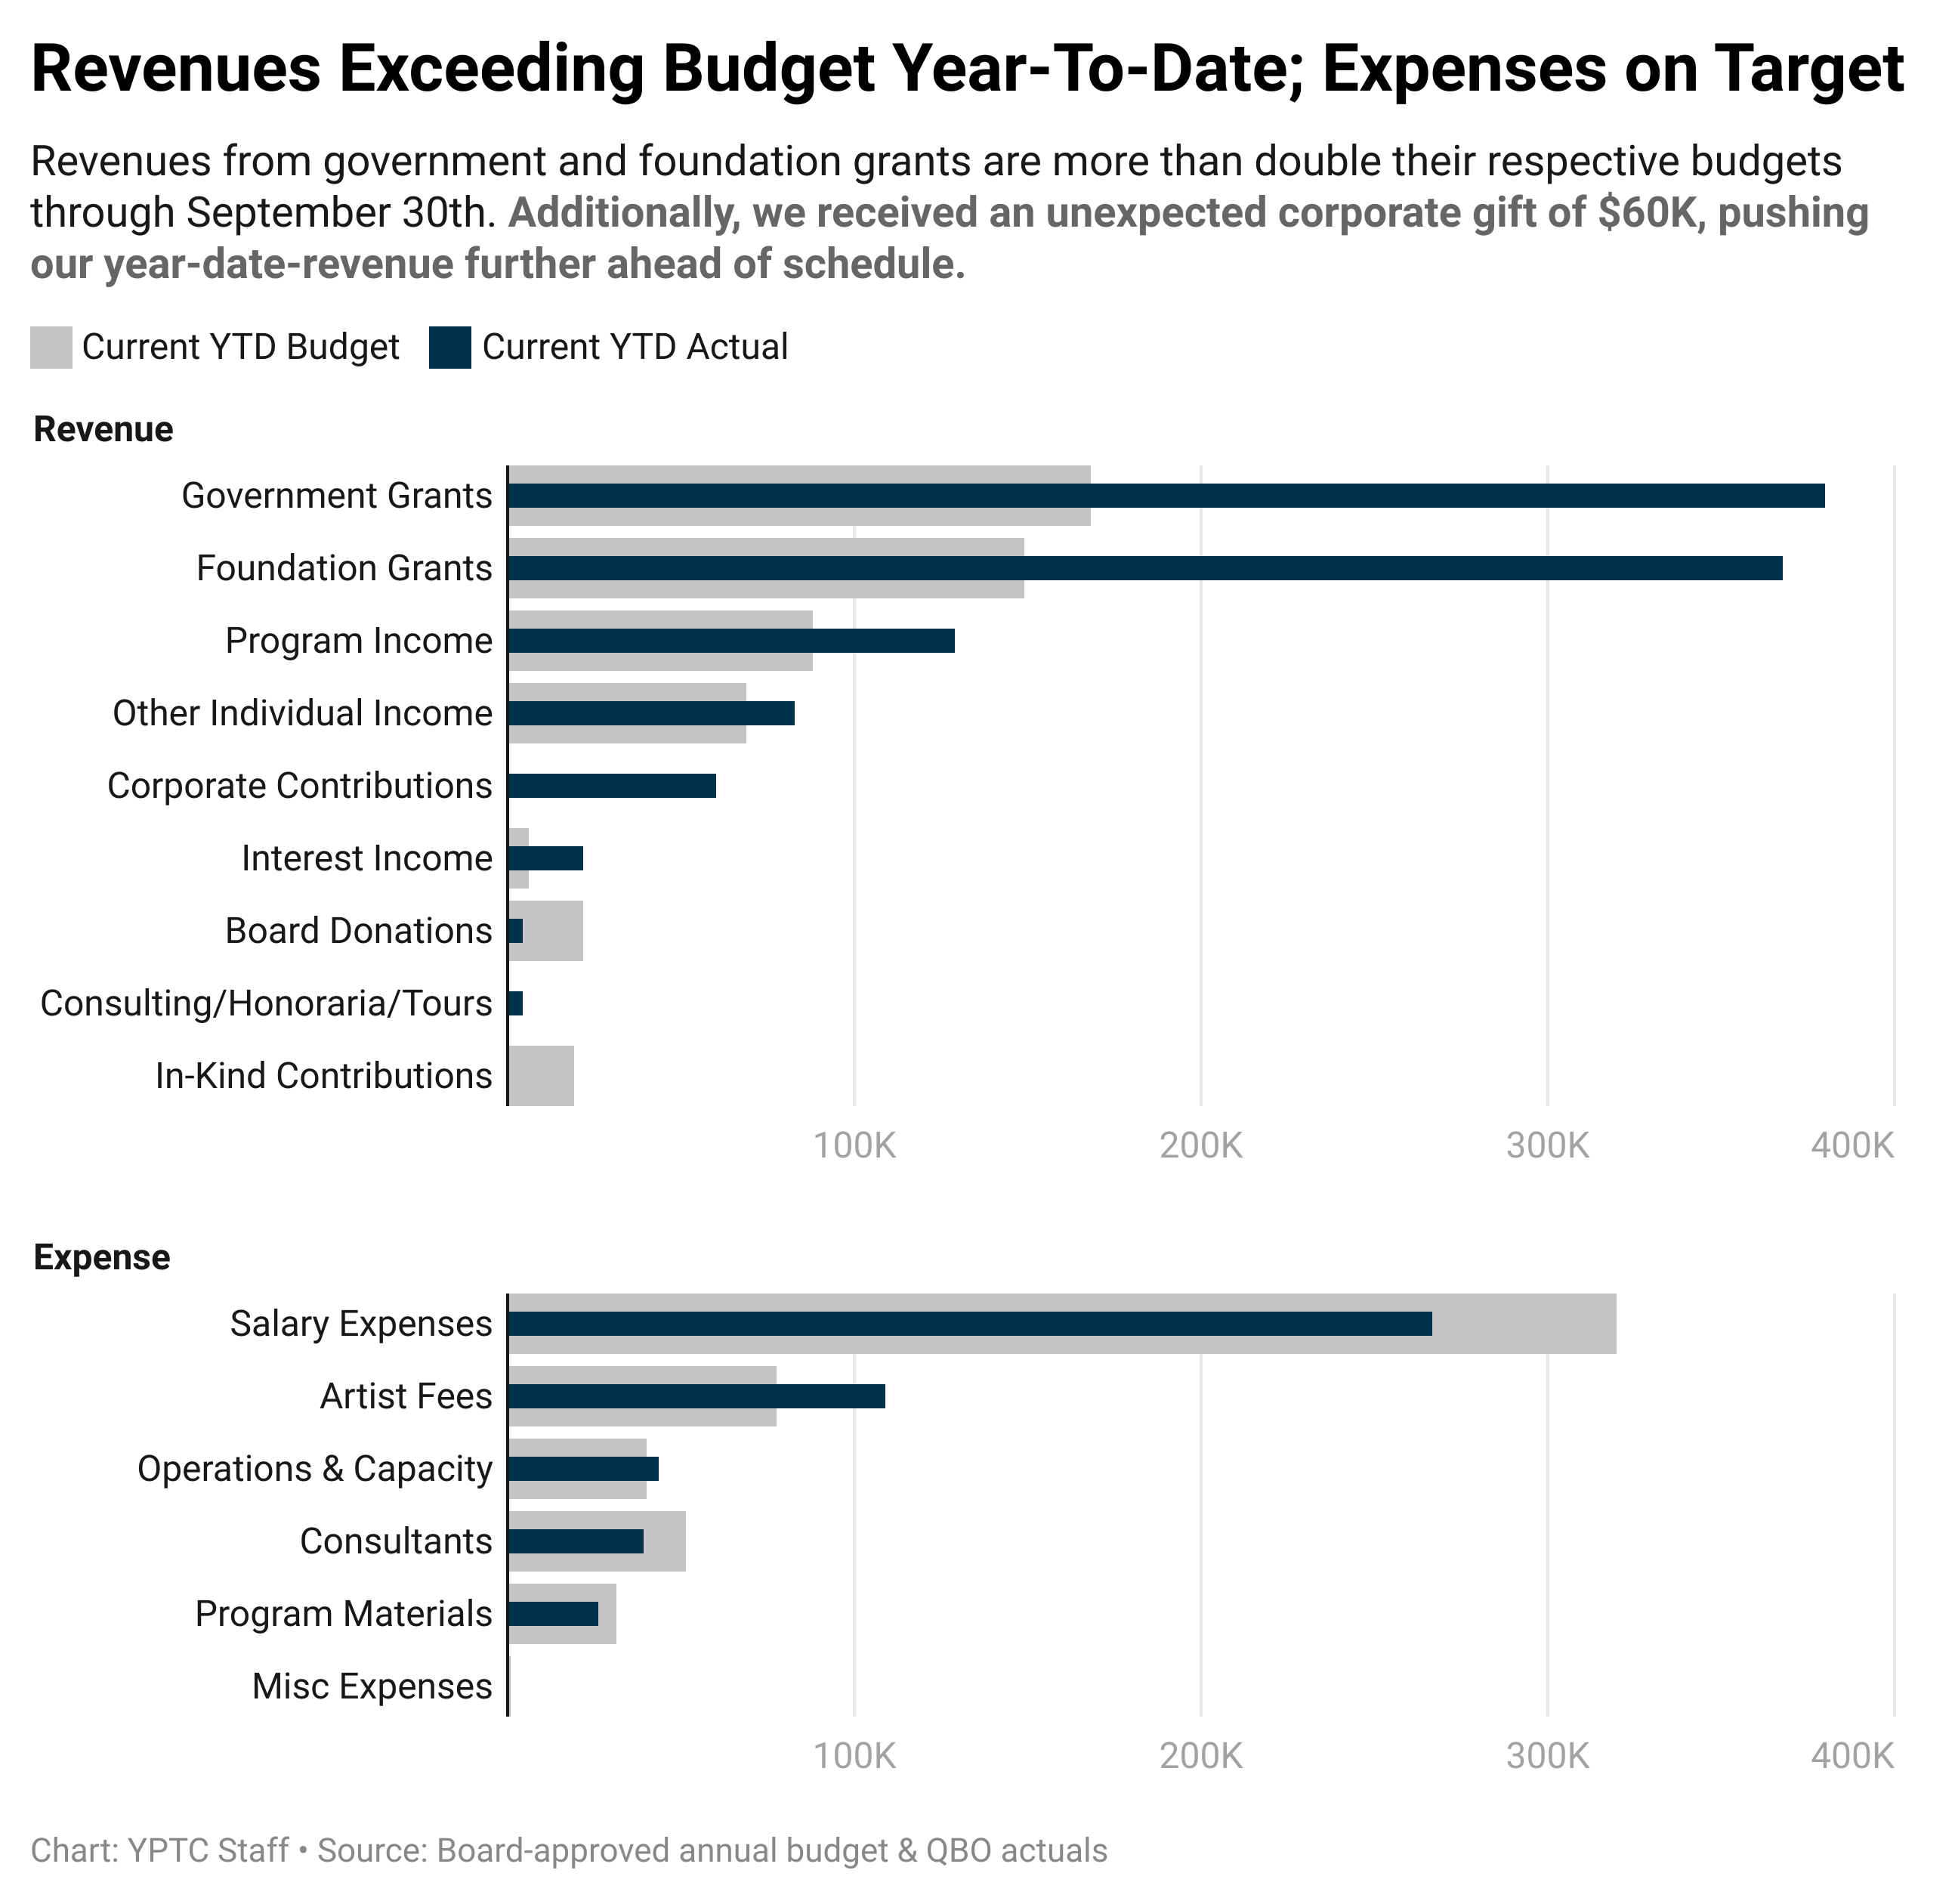 7Y6gI-revenues-exceeding-budget-year-to-date-expenses-on-target